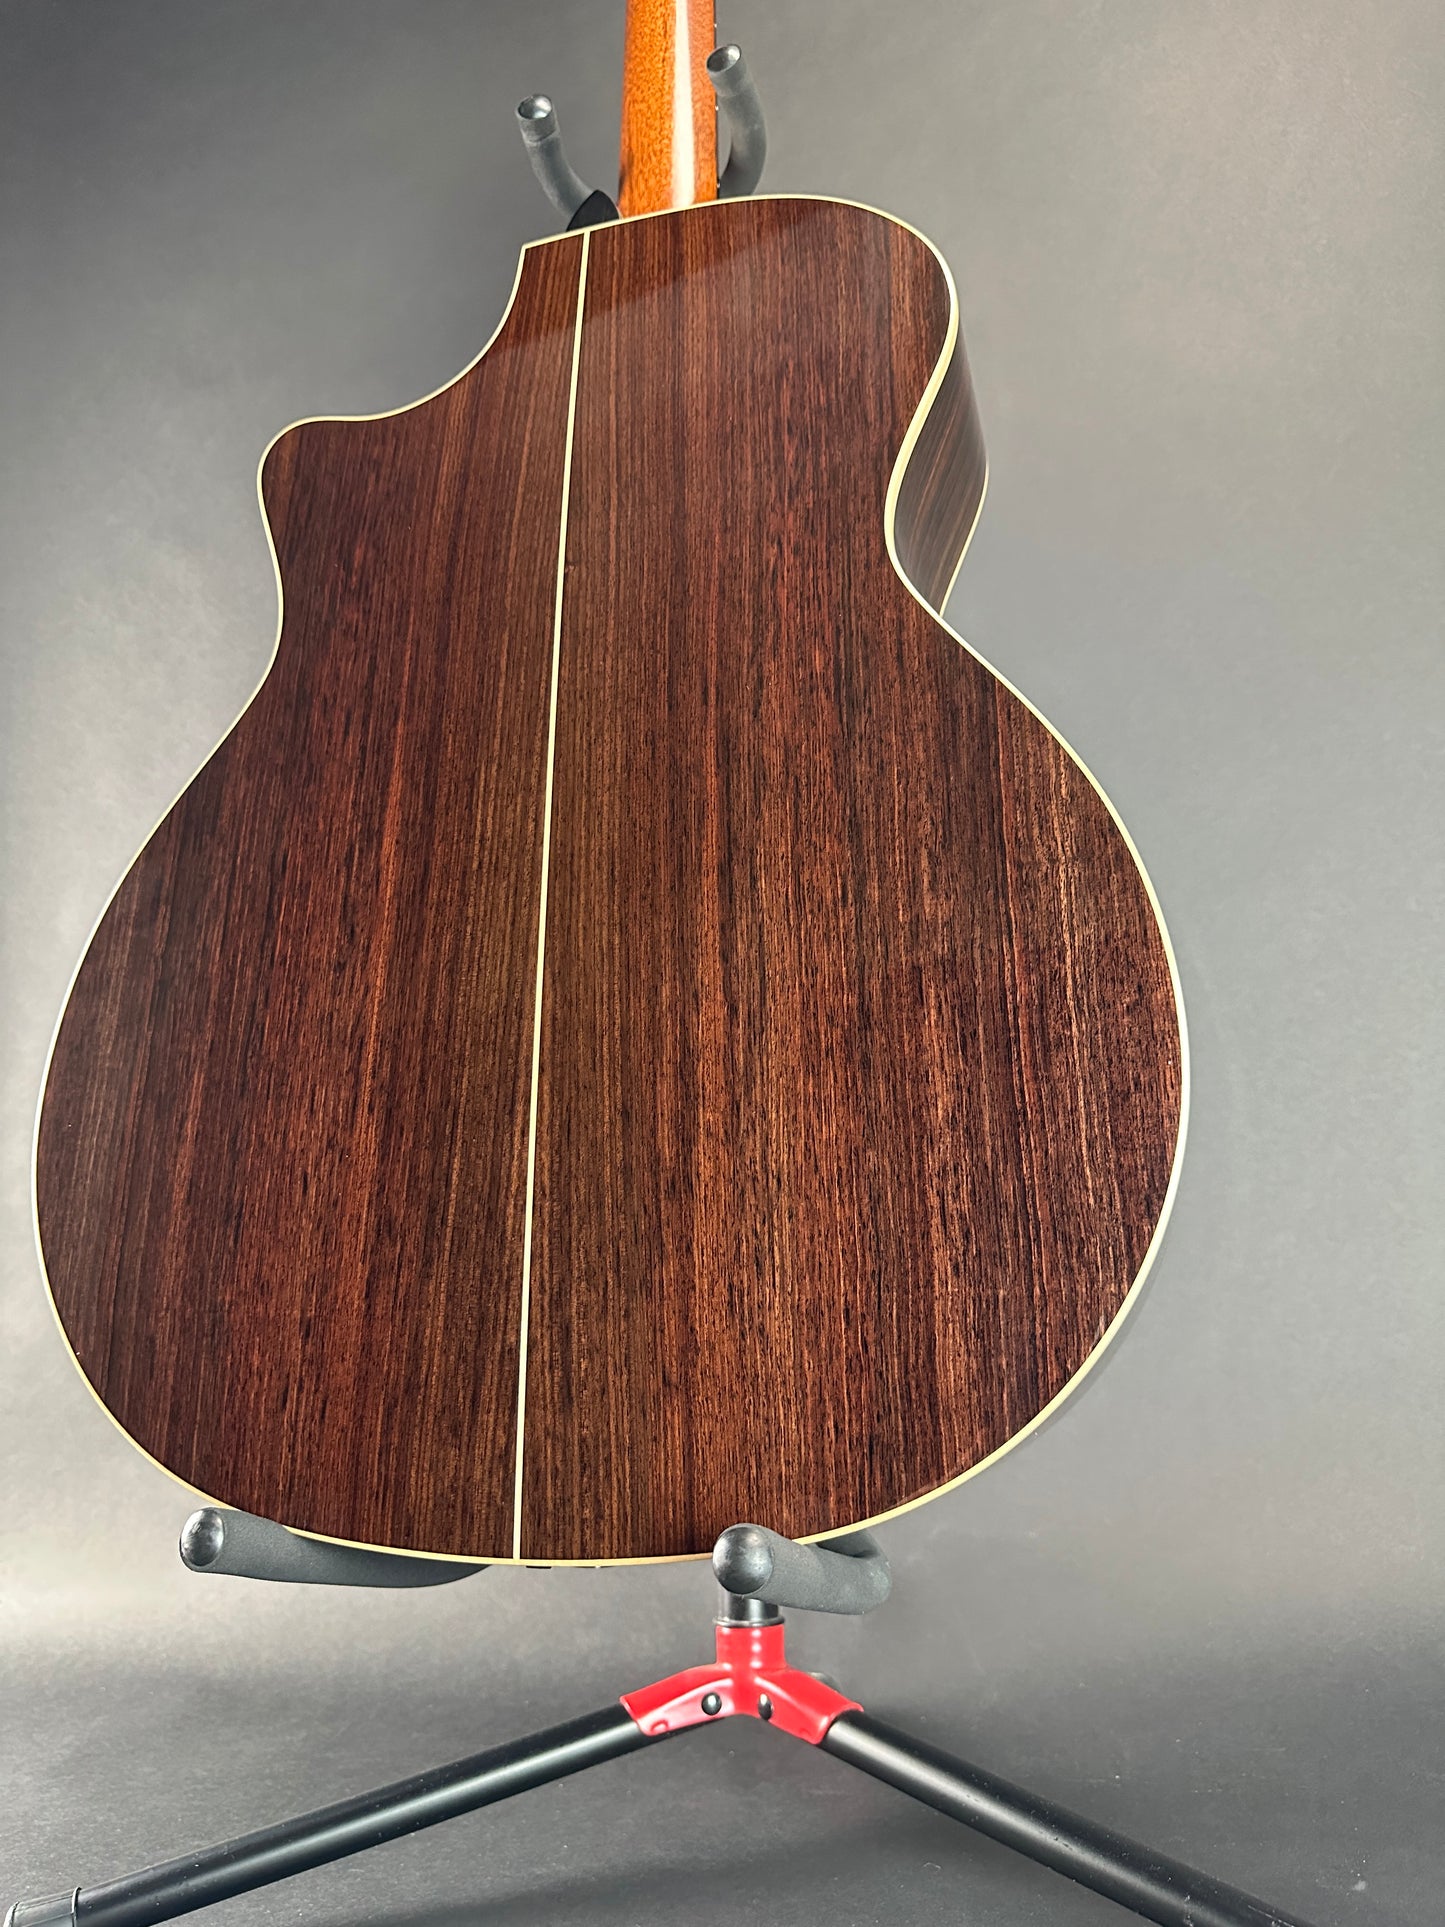 Back angle of Used 2022 Taylor 814ce V-Class.